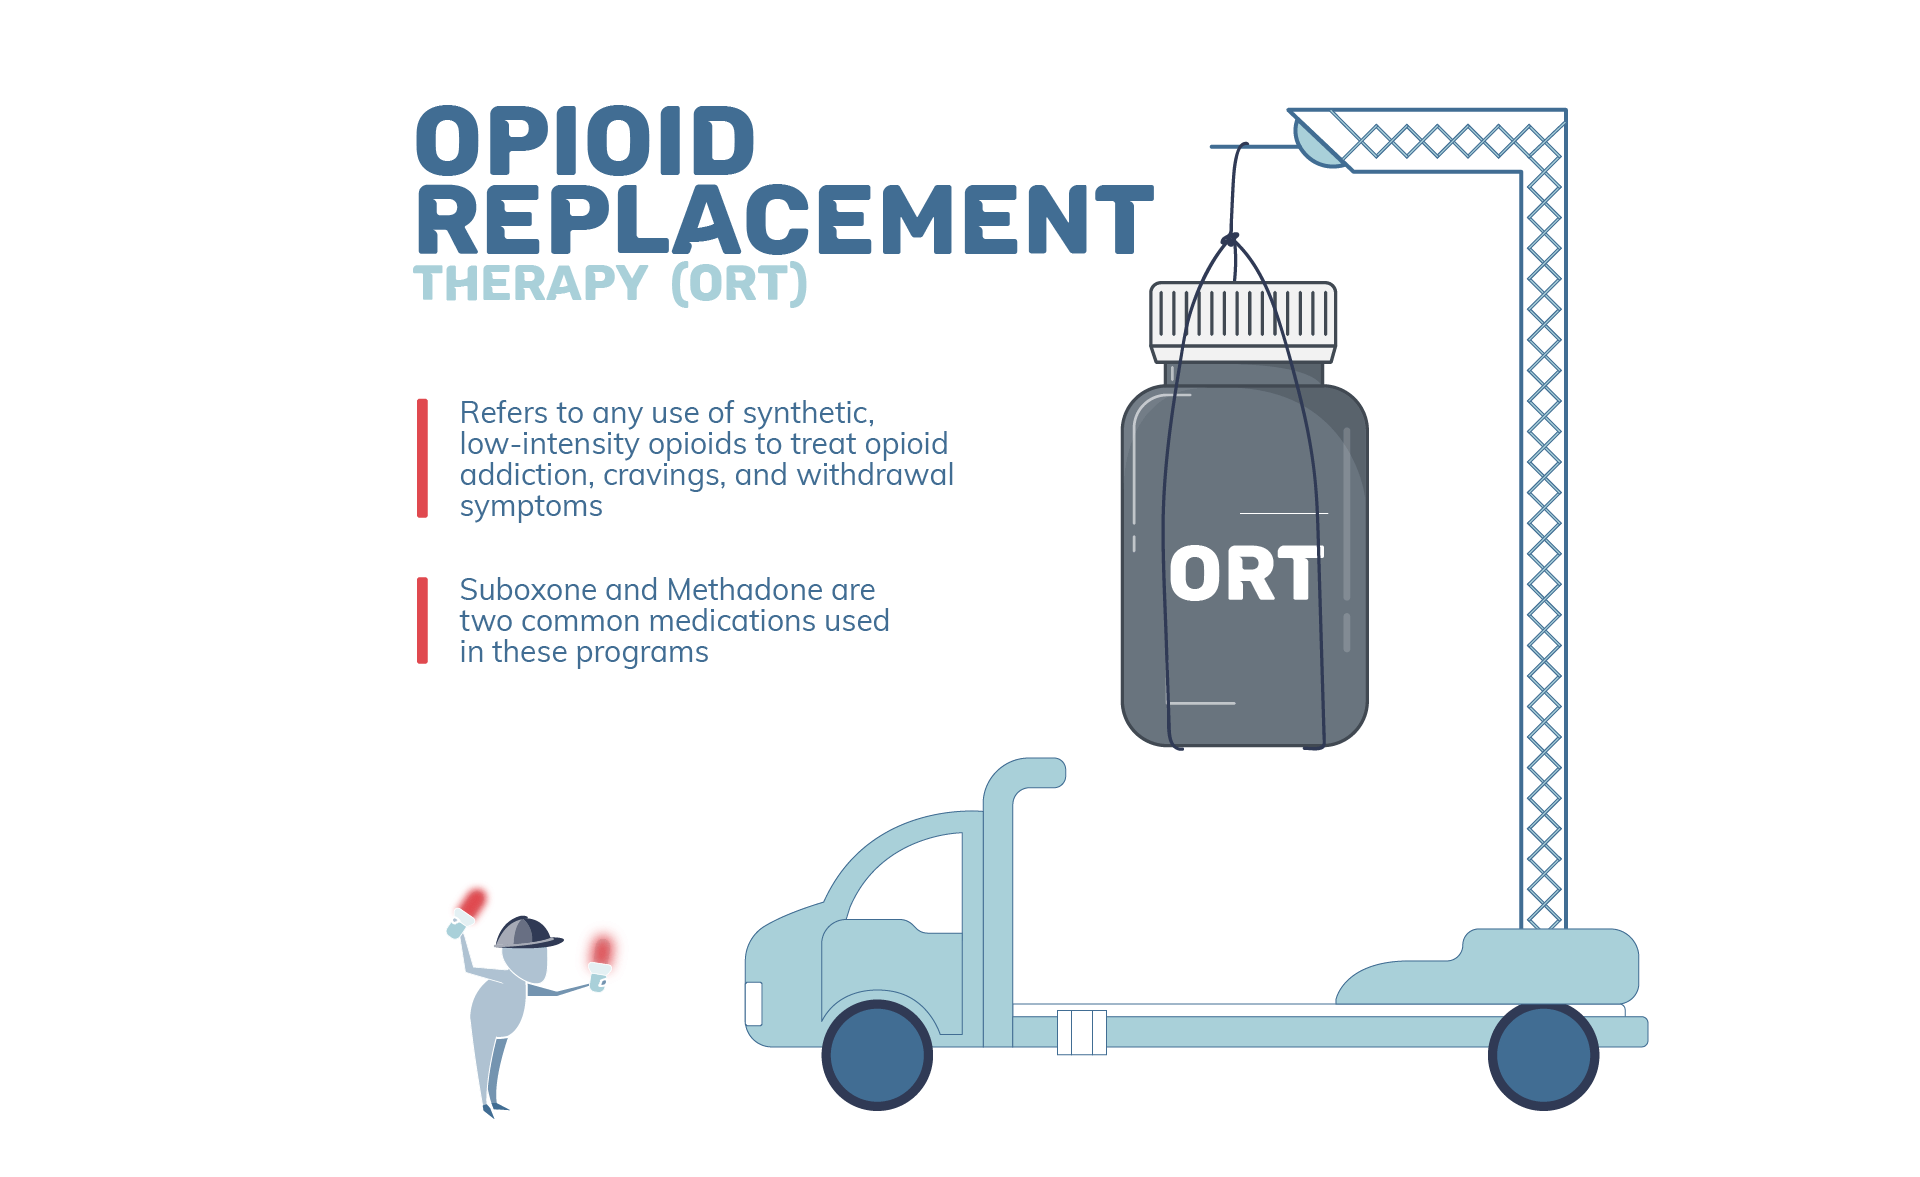 Opioid Replacement Therapy